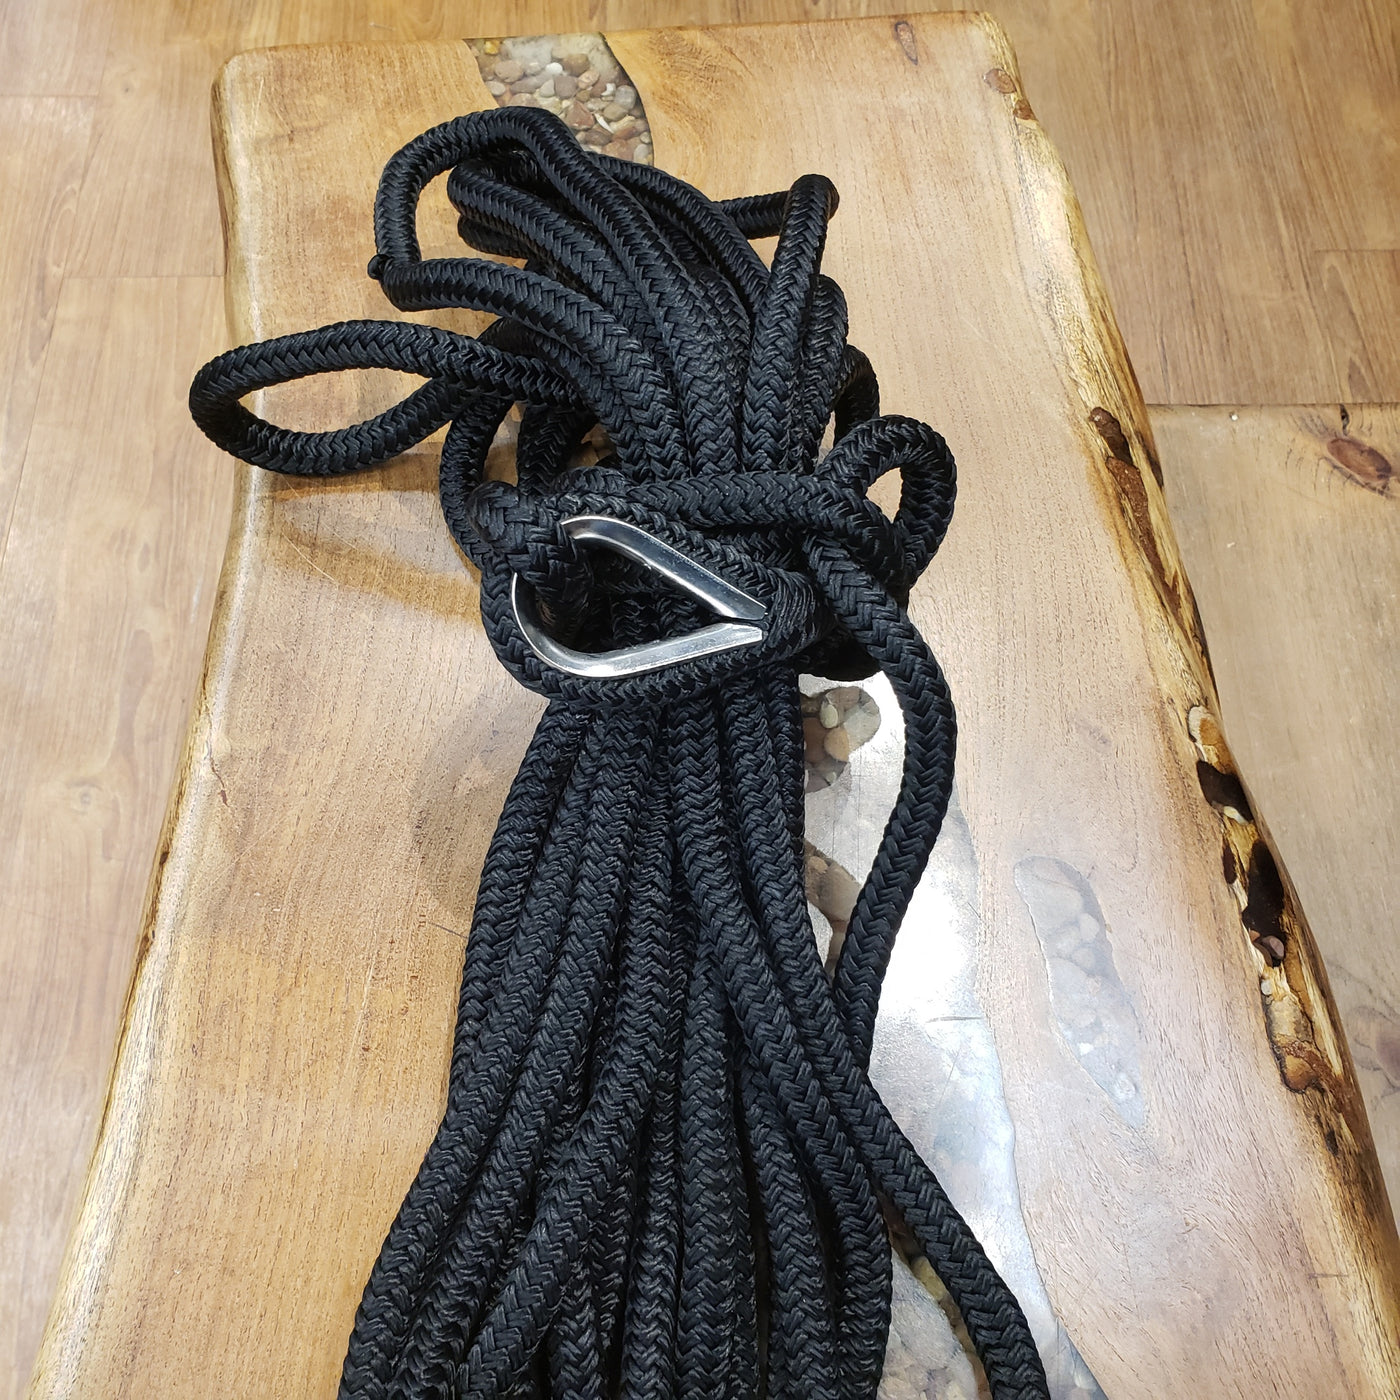 Anchor Rope 50' - 1/2" - Black